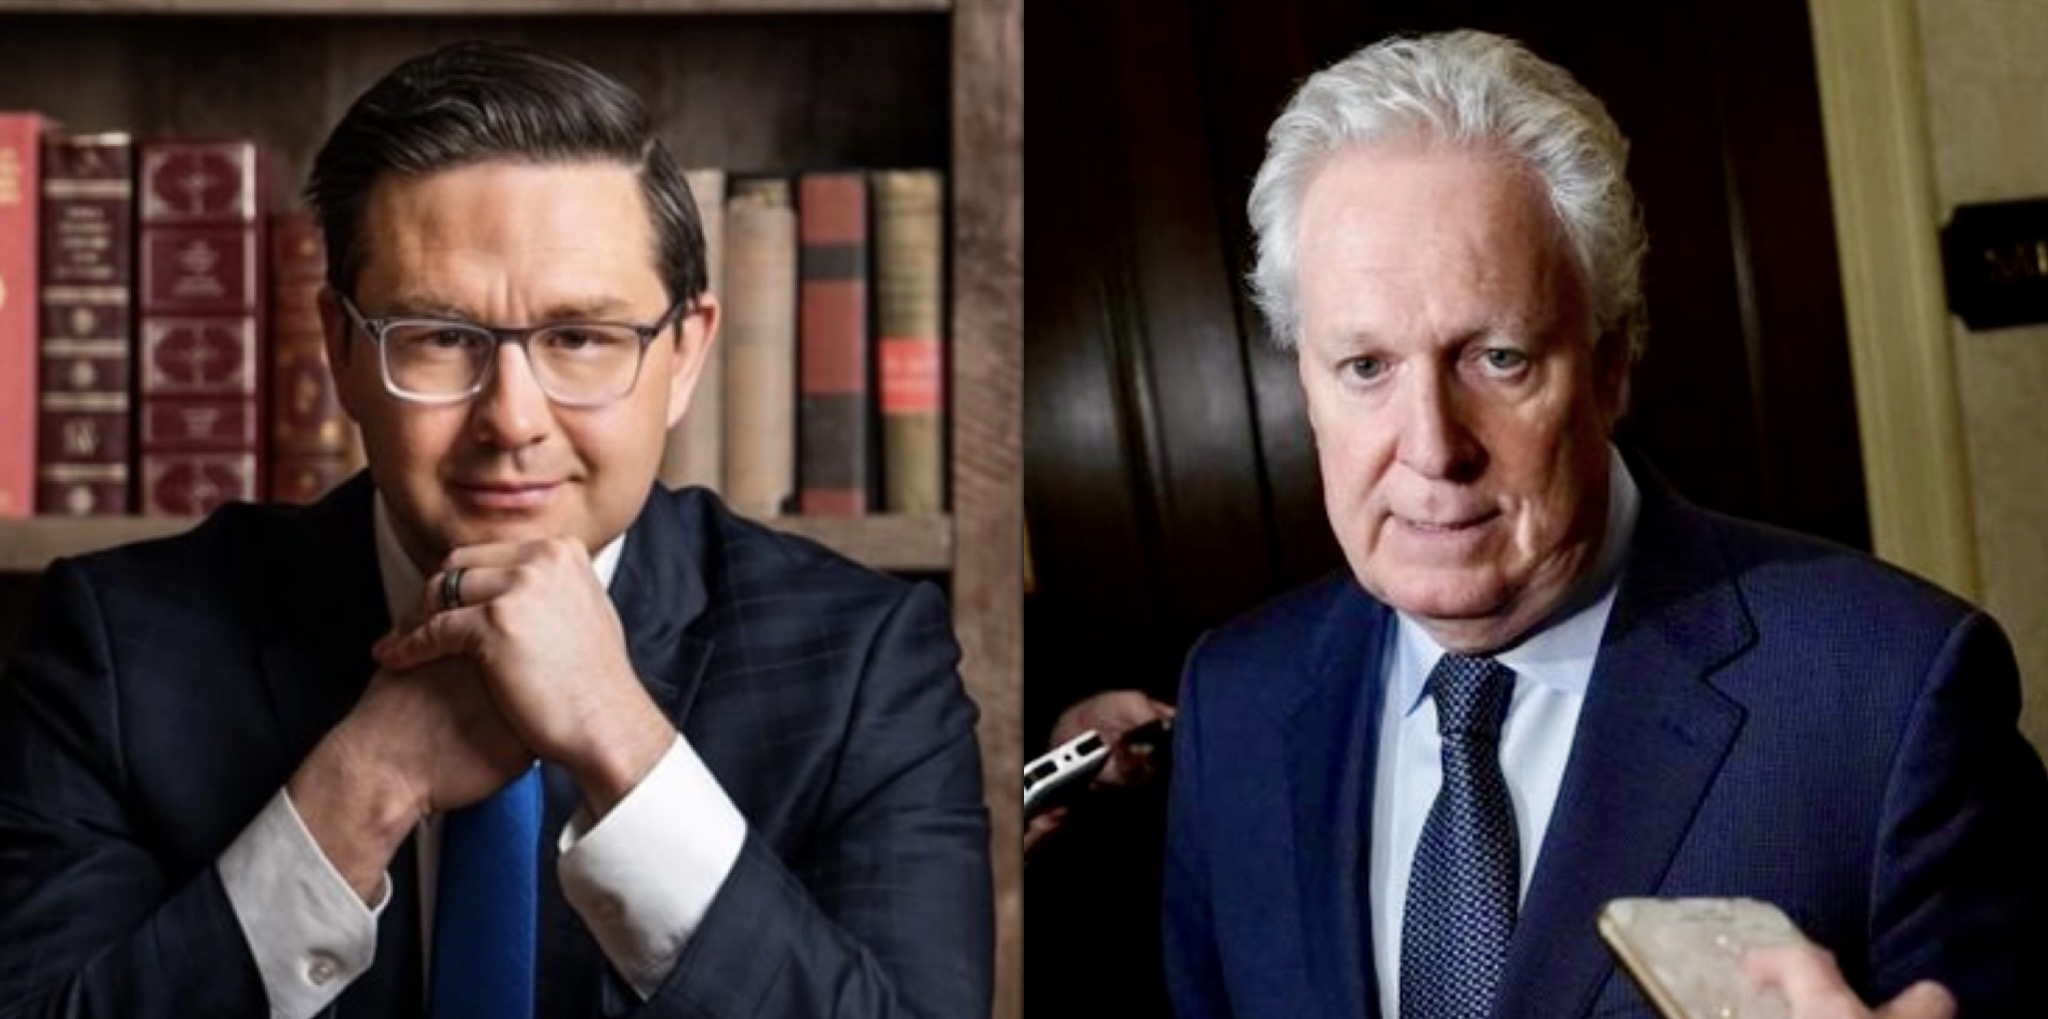 Pierre Poilievre or Jean Charest as CPC leader? Either way, Trudeau wins